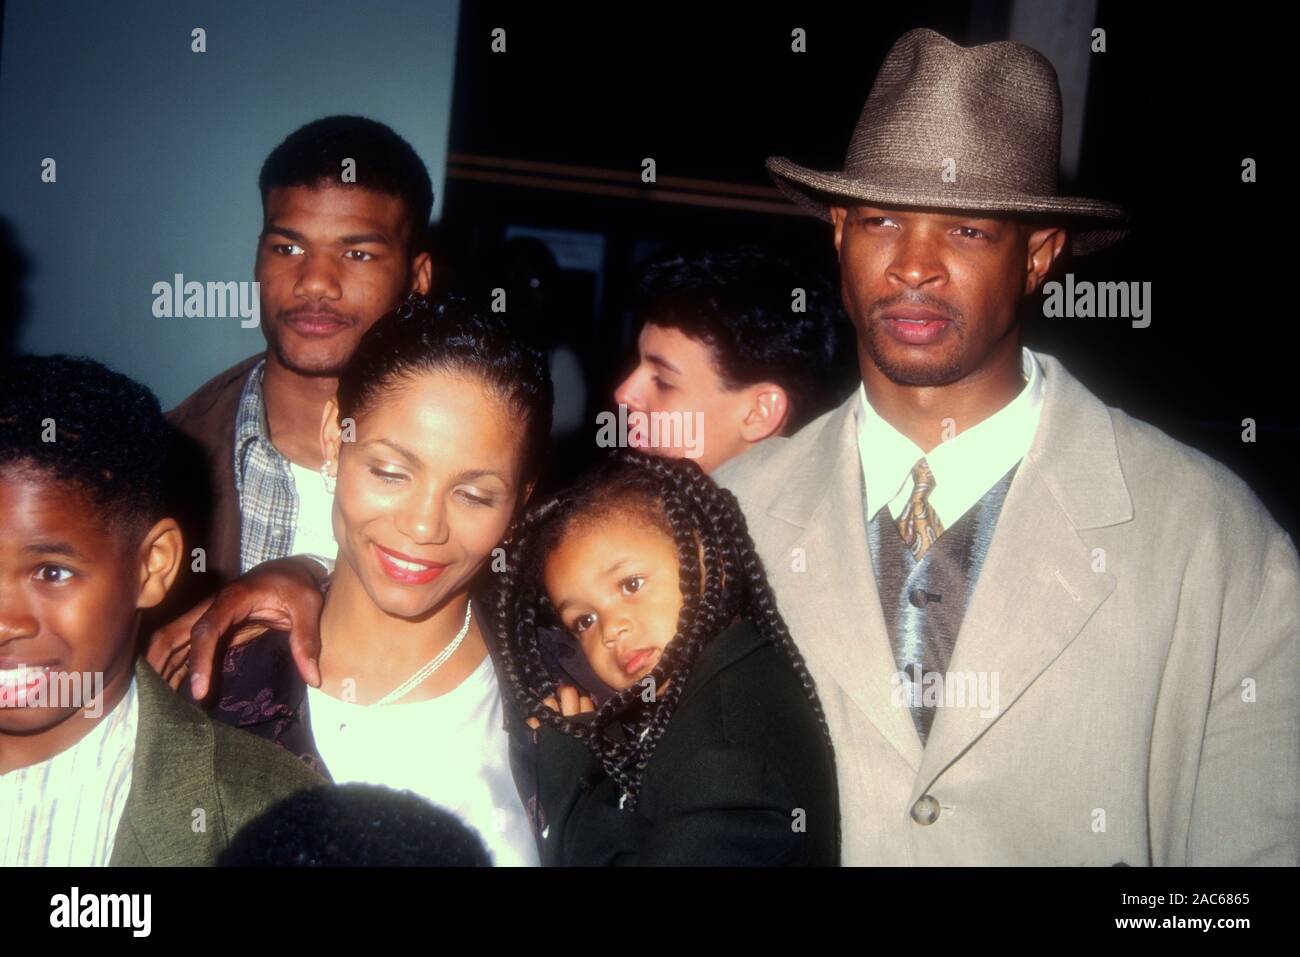 Century City, California, USA 22nd March 1995 Actor Damon Wayans Jr., actor Damien Dante Wayans and Comedian Damon Wayans attend Universal Pictures' 'Major Payne' Premiere on March 22, 1995 at Cineplex Odeon  Century Plaza Cinemas in Century City, California, USA. Photo by Barry King/Alamy Stock Photo Stock Photo